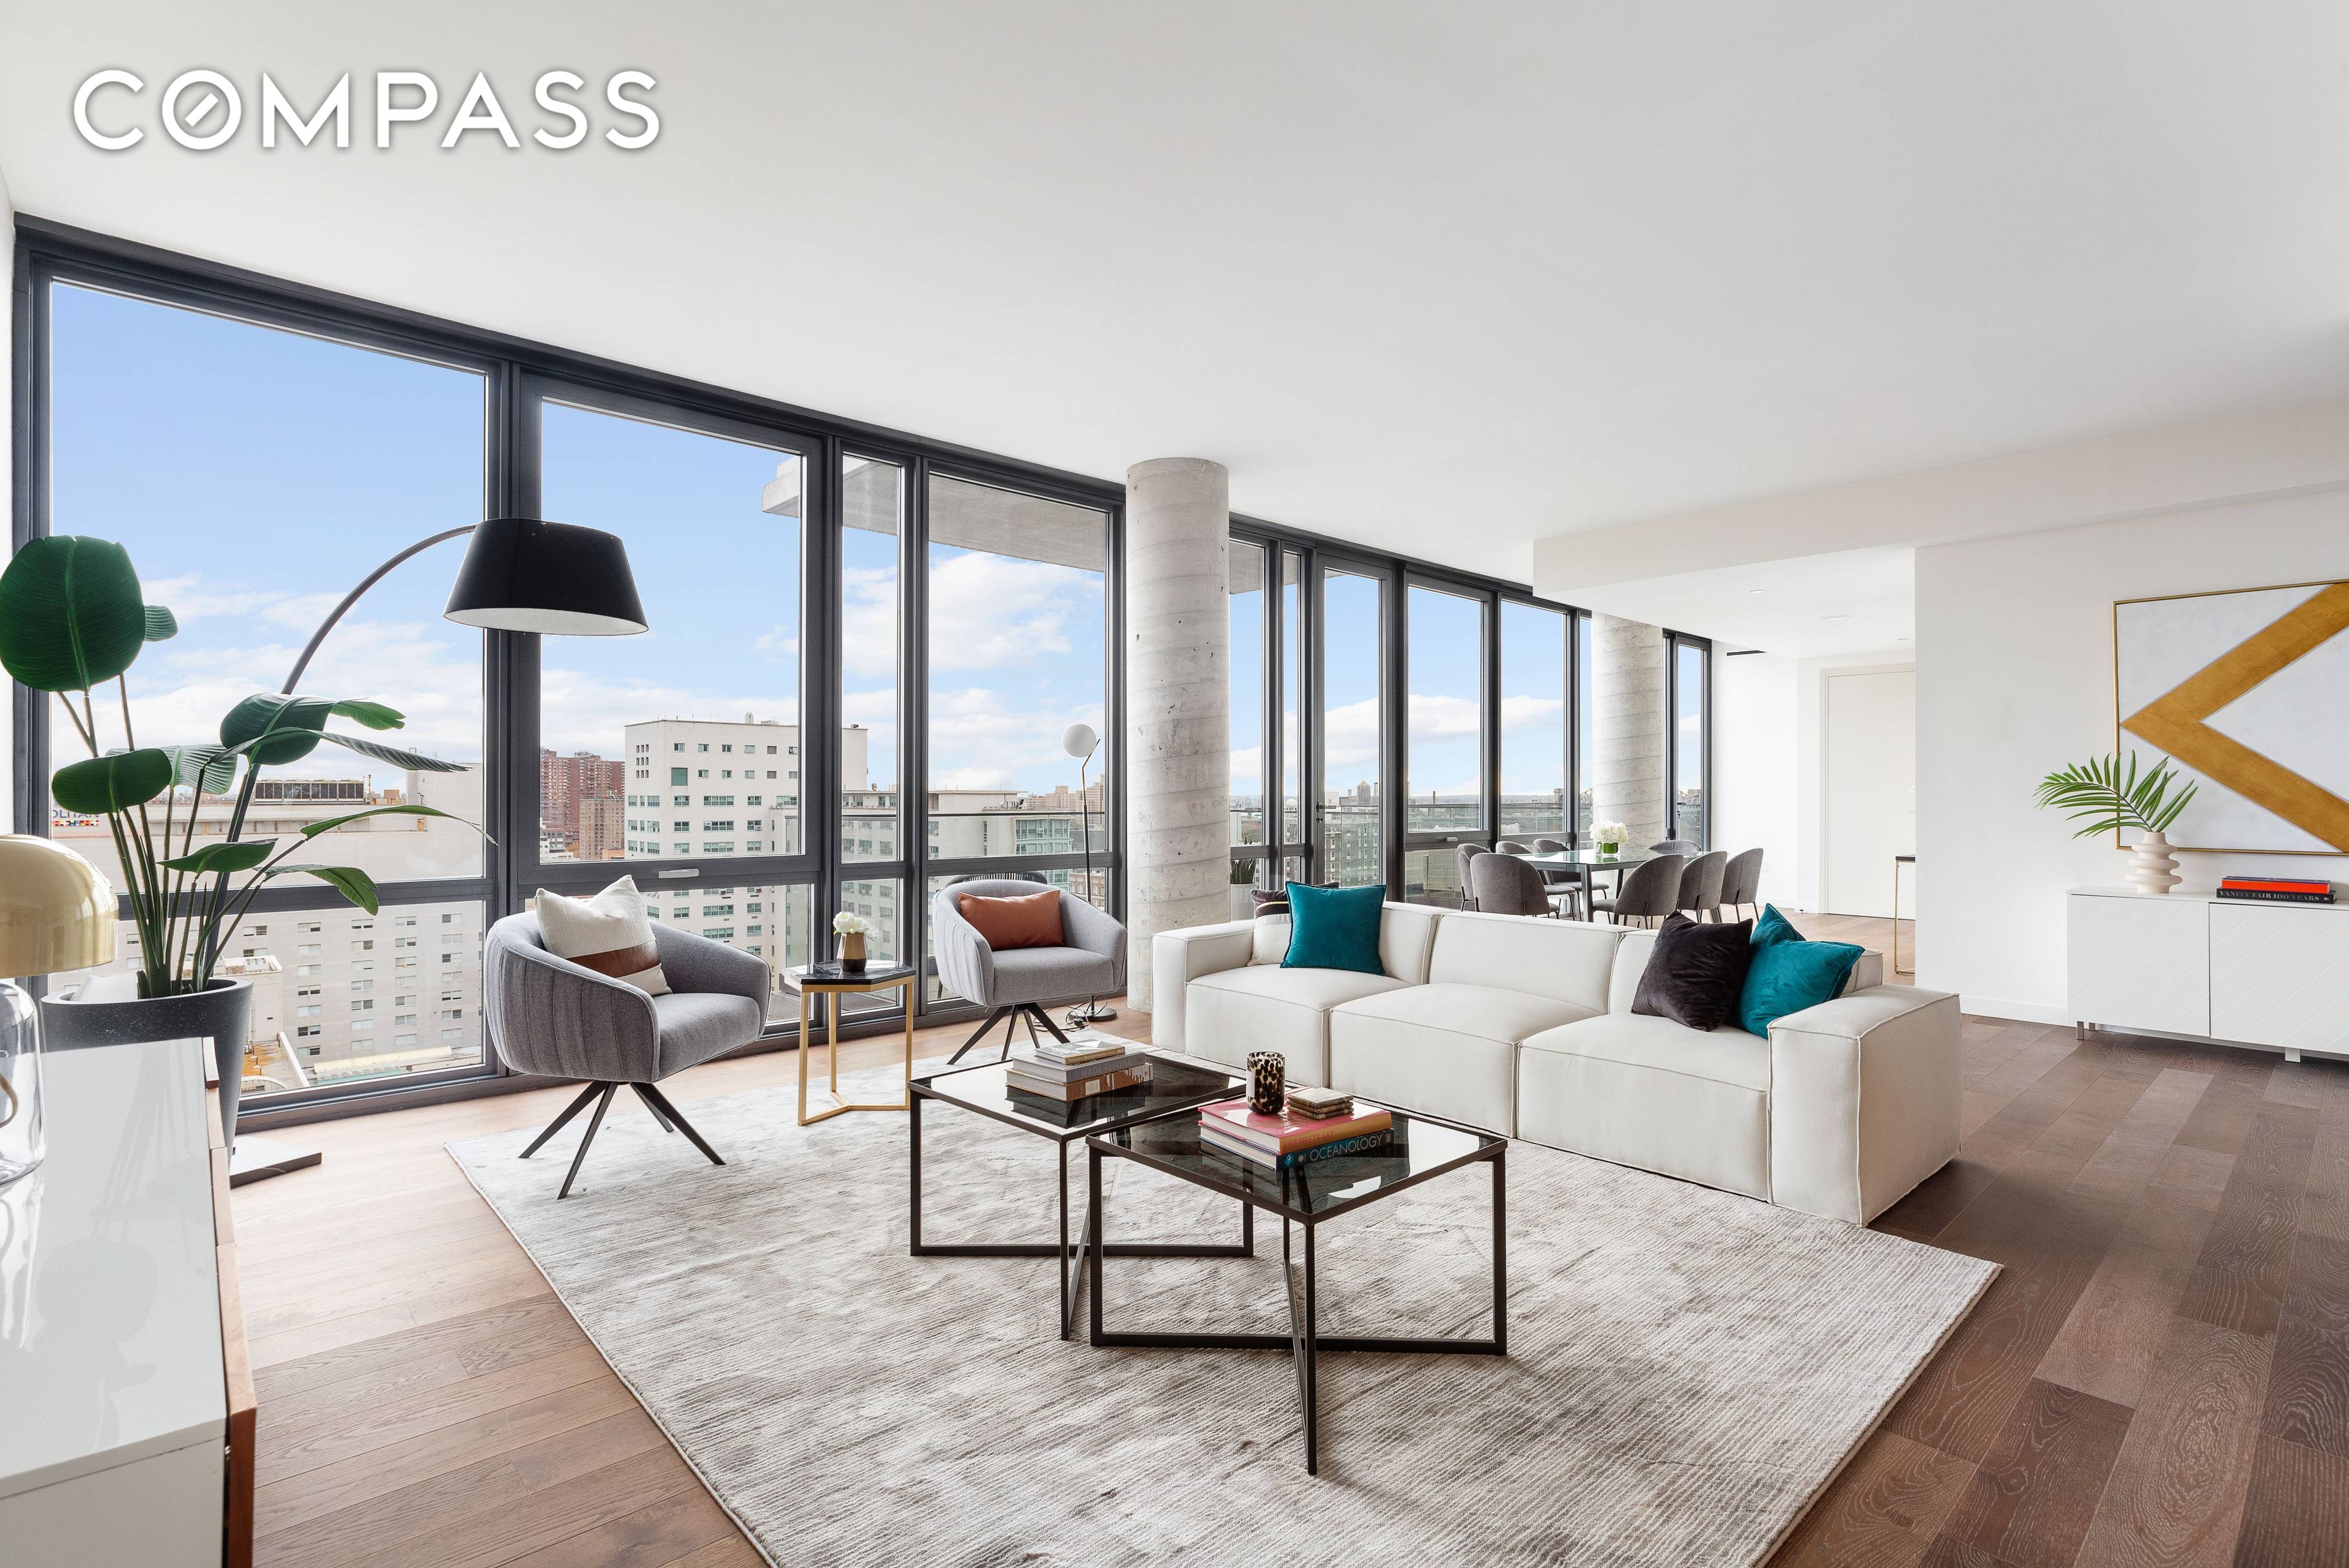 PH4 at 302 East 96th Street presents the ultimate opportunity for luxurious indoor and outdoor living.